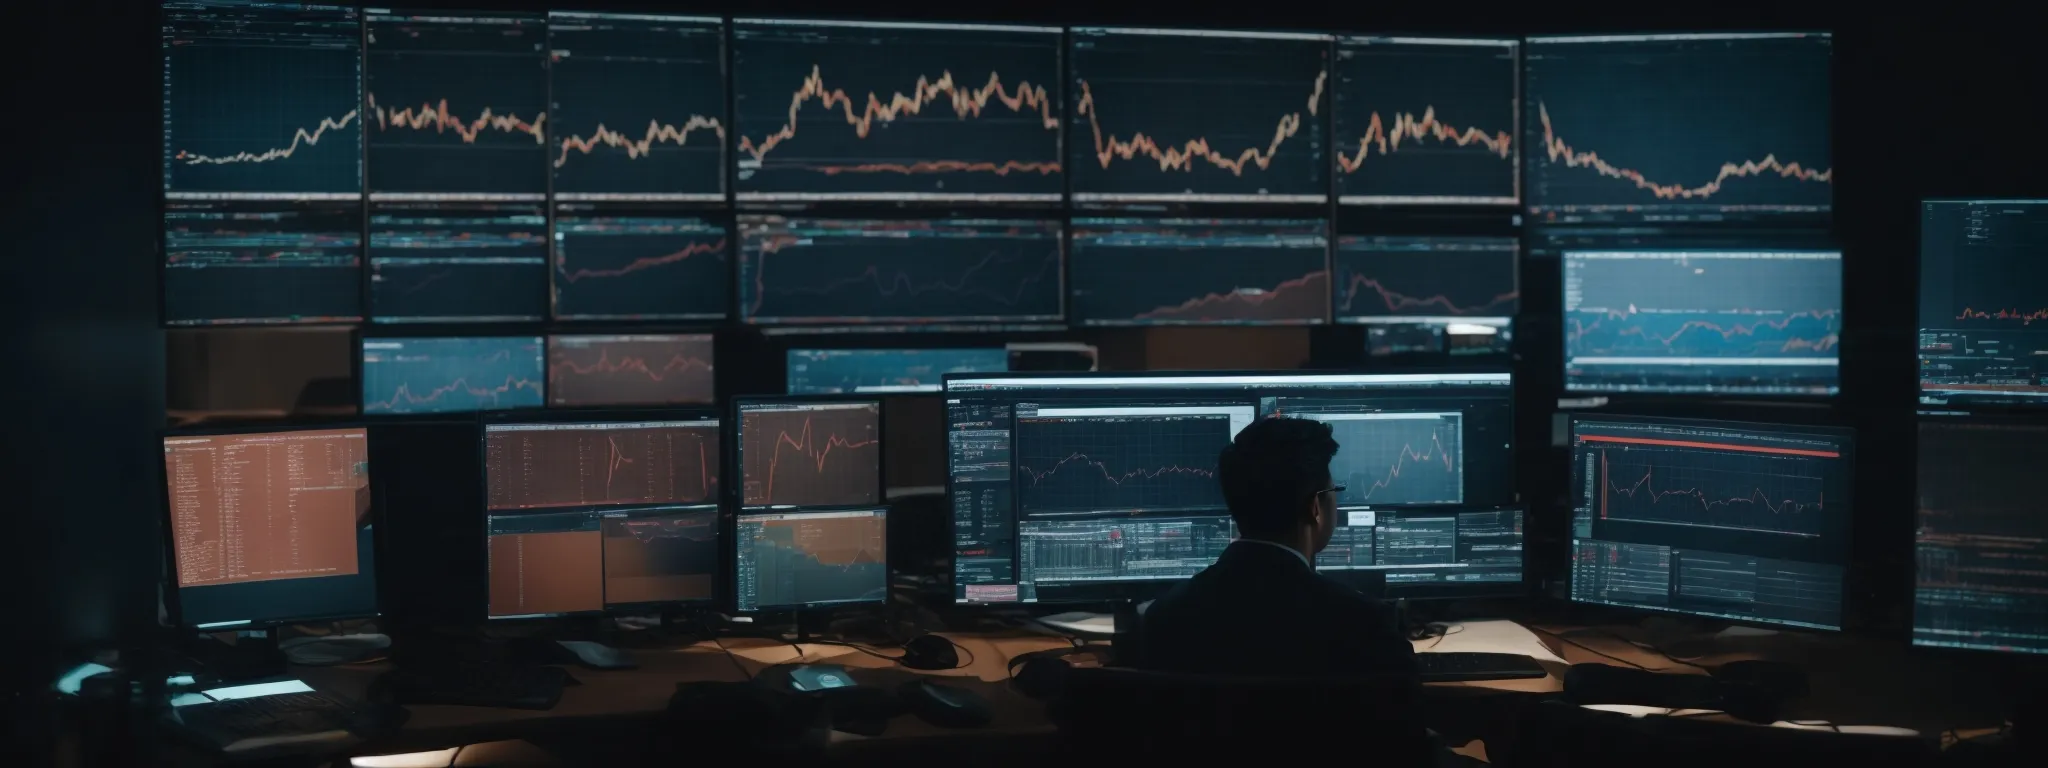 a person sits before multiple computer screens, analyzing complex data charts that reflect search engine trends.